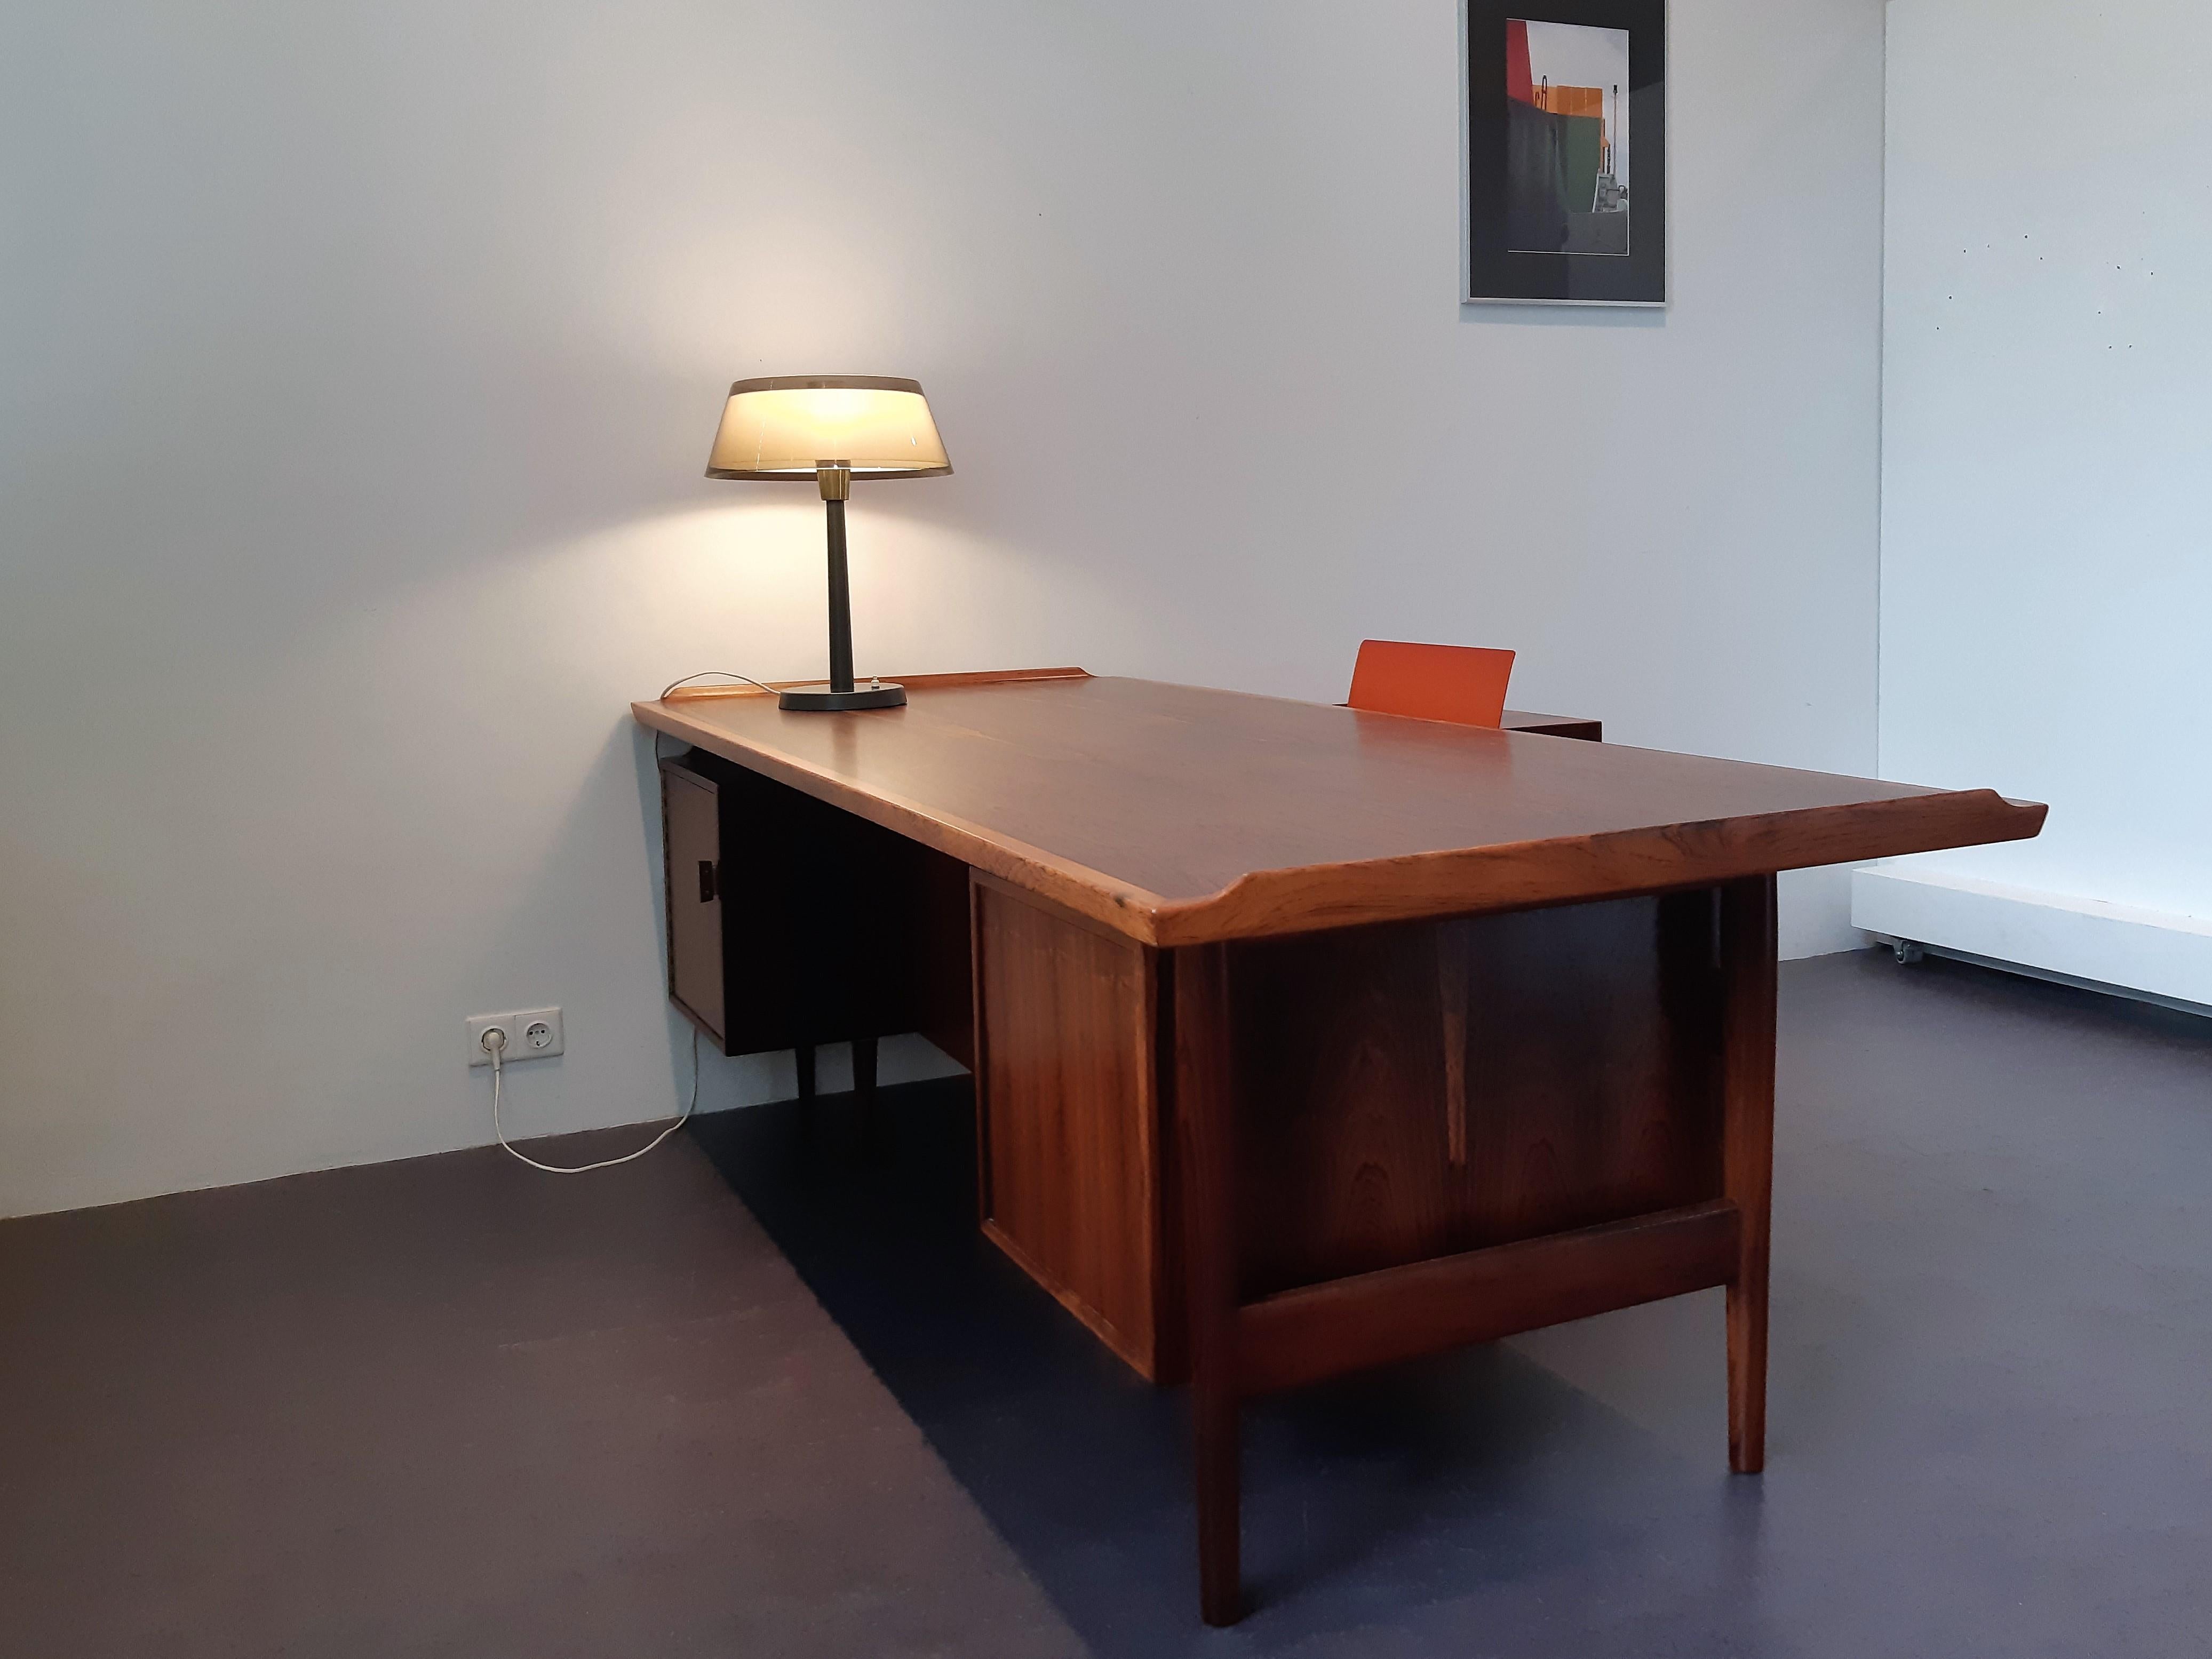 This superb writing desk with integrated sideboard, model 209, was designed by Arne Vodder for Sibast Møbelfabrik in Denmark. It is made out of premium rosewood and has a beautiful top with refined raised edges. The desk has two drawers and a niche